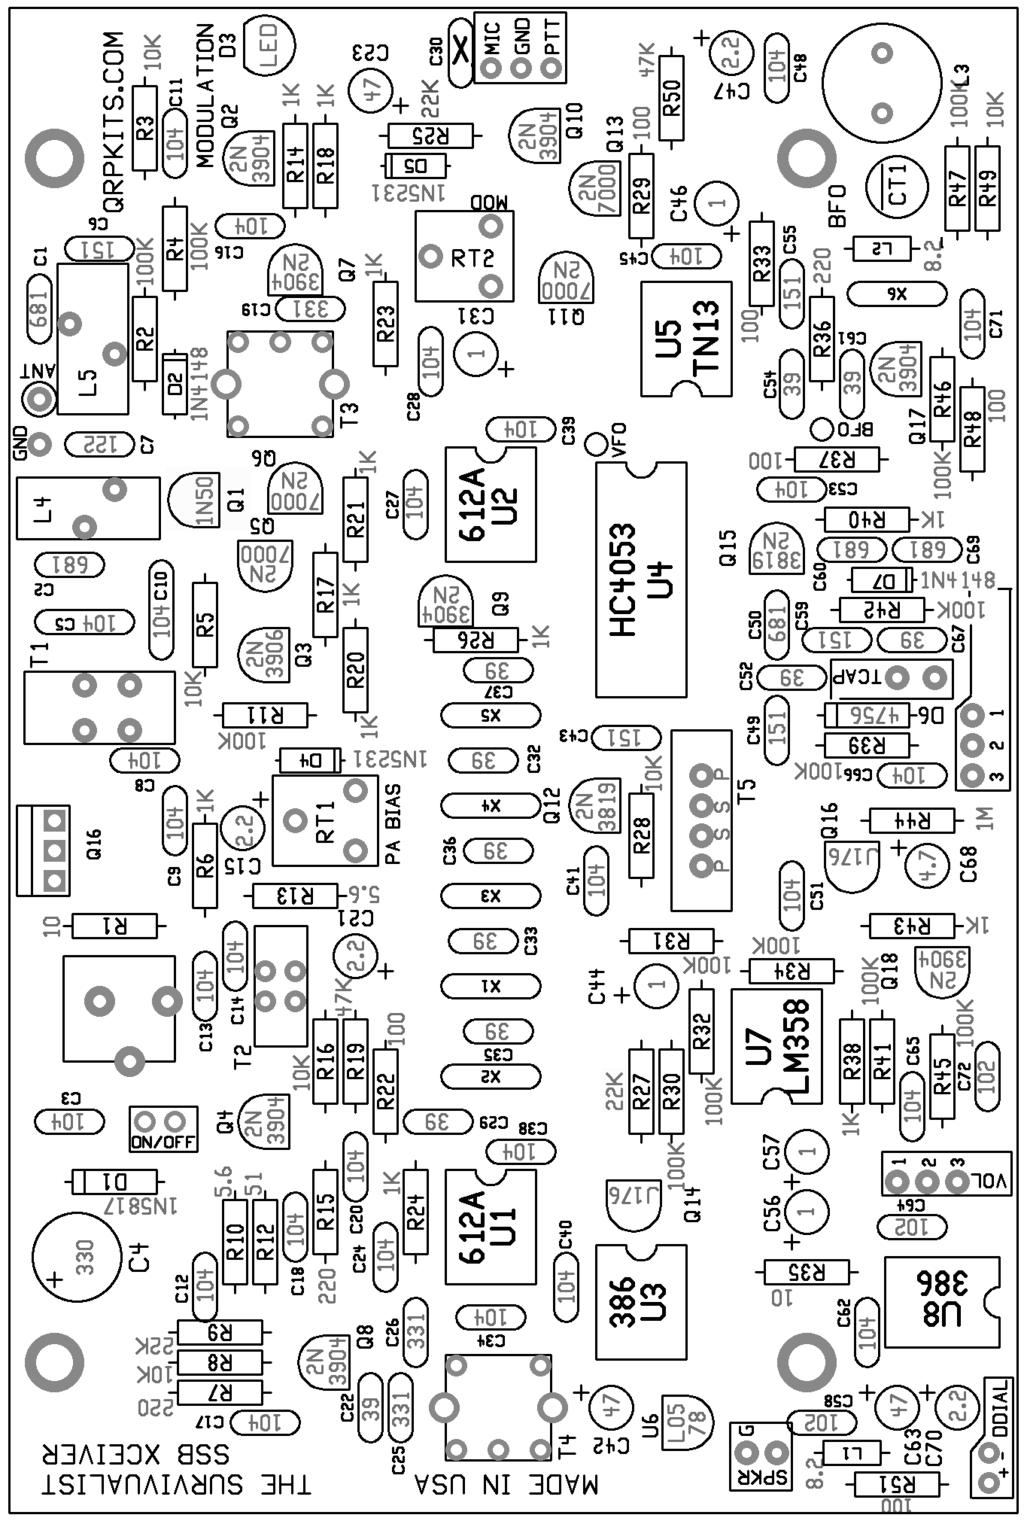 Print this large, ink jet printer friendly parts placement and value diagram for easy reference during assembly.